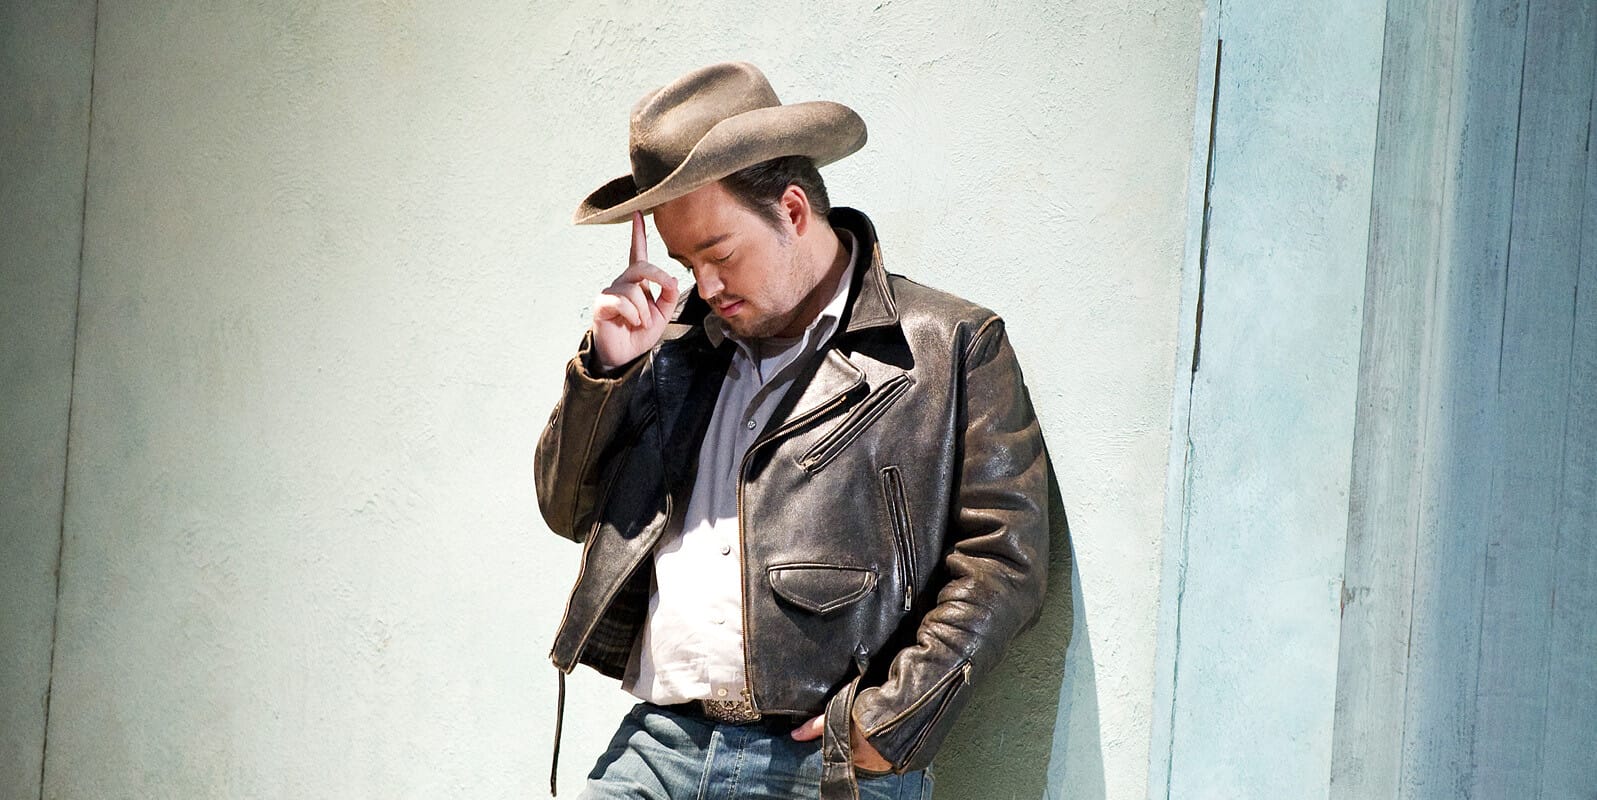 Man in cowboy hat and leather jacket leans against wall